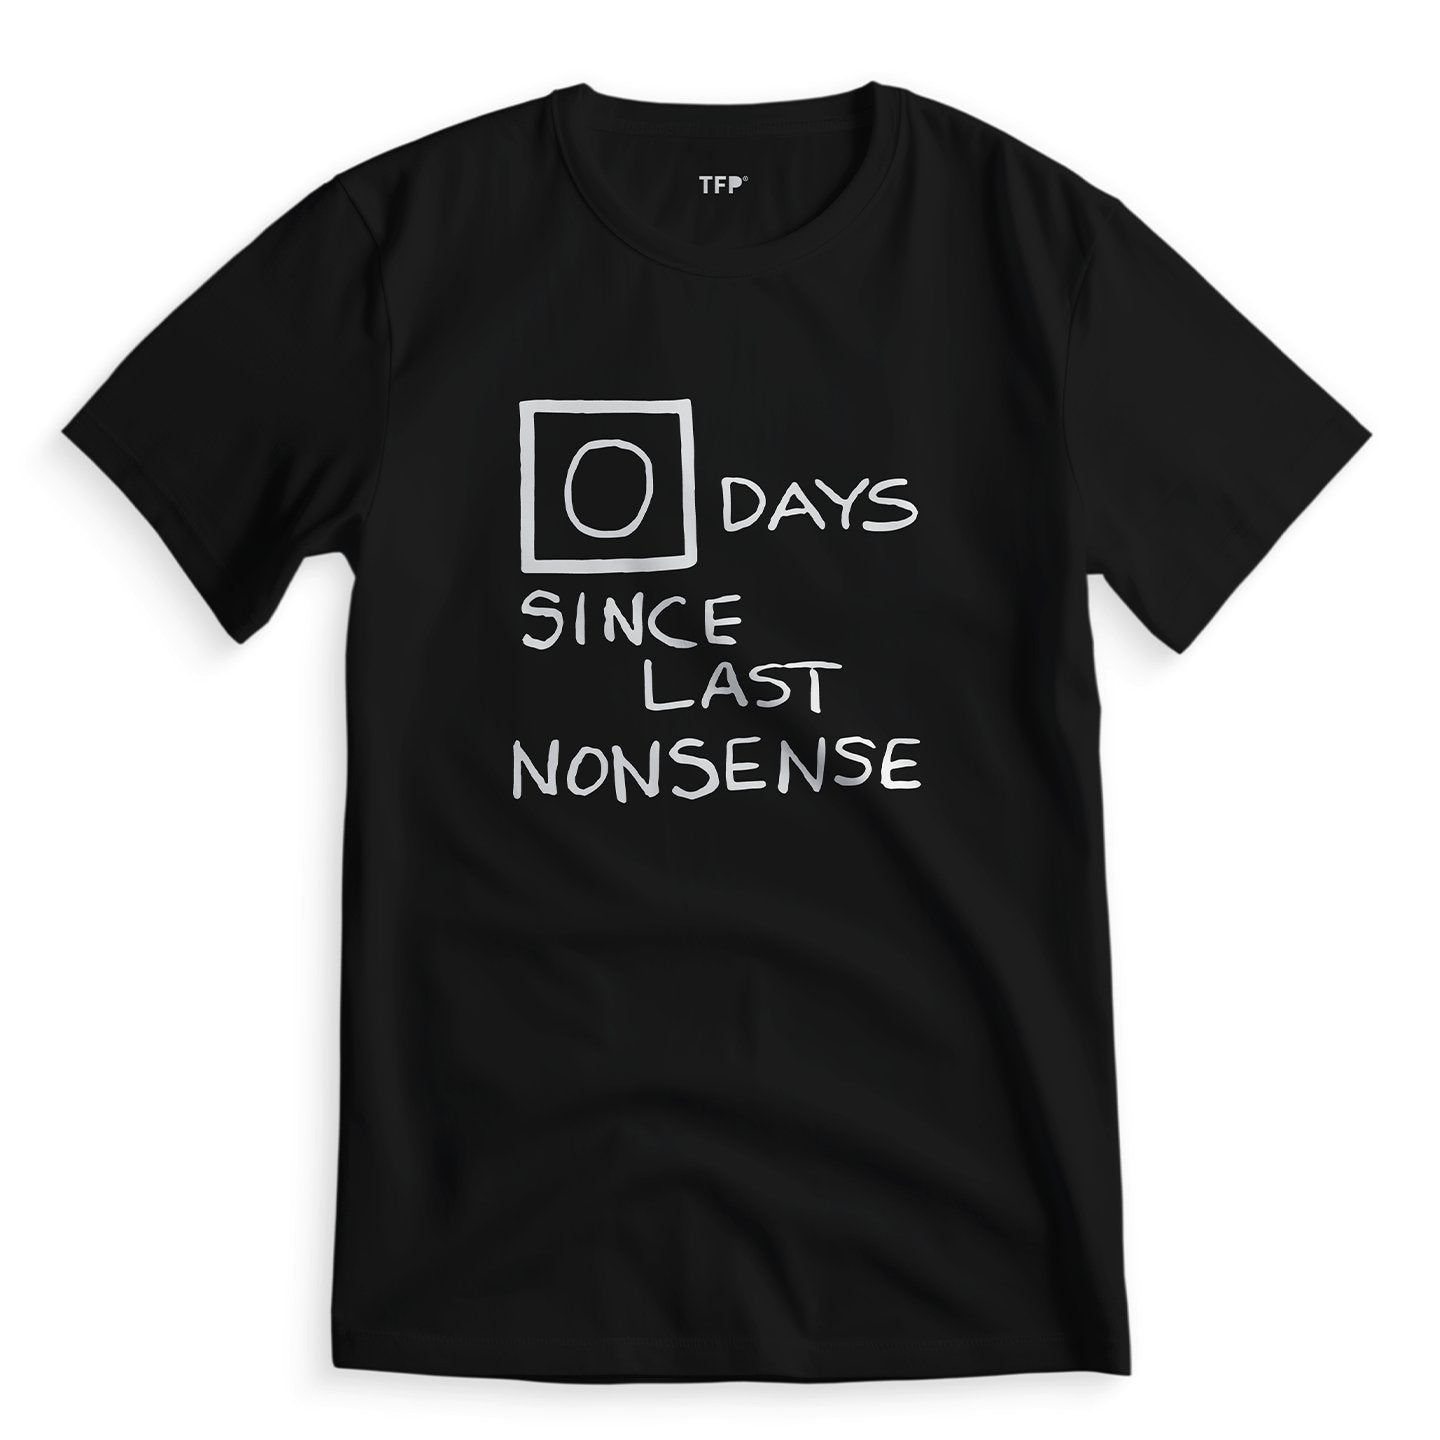 0 Days Since Last Nonsense The Office - T-Shirt